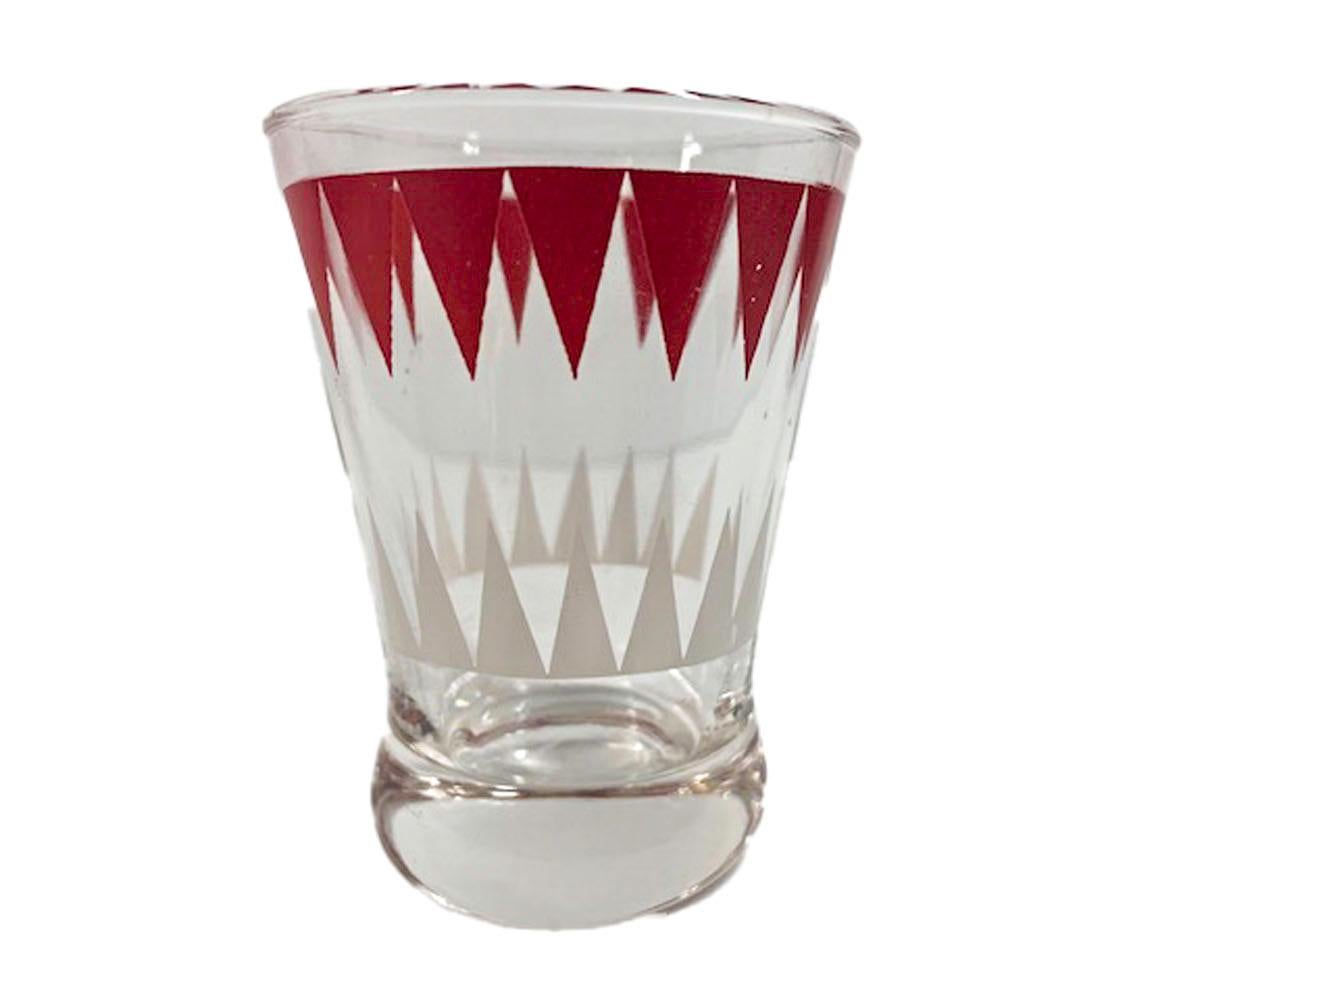 20th Century Art Deco Cocktail Shaker Set w/Geometric Red and White Arrow Design For Sale